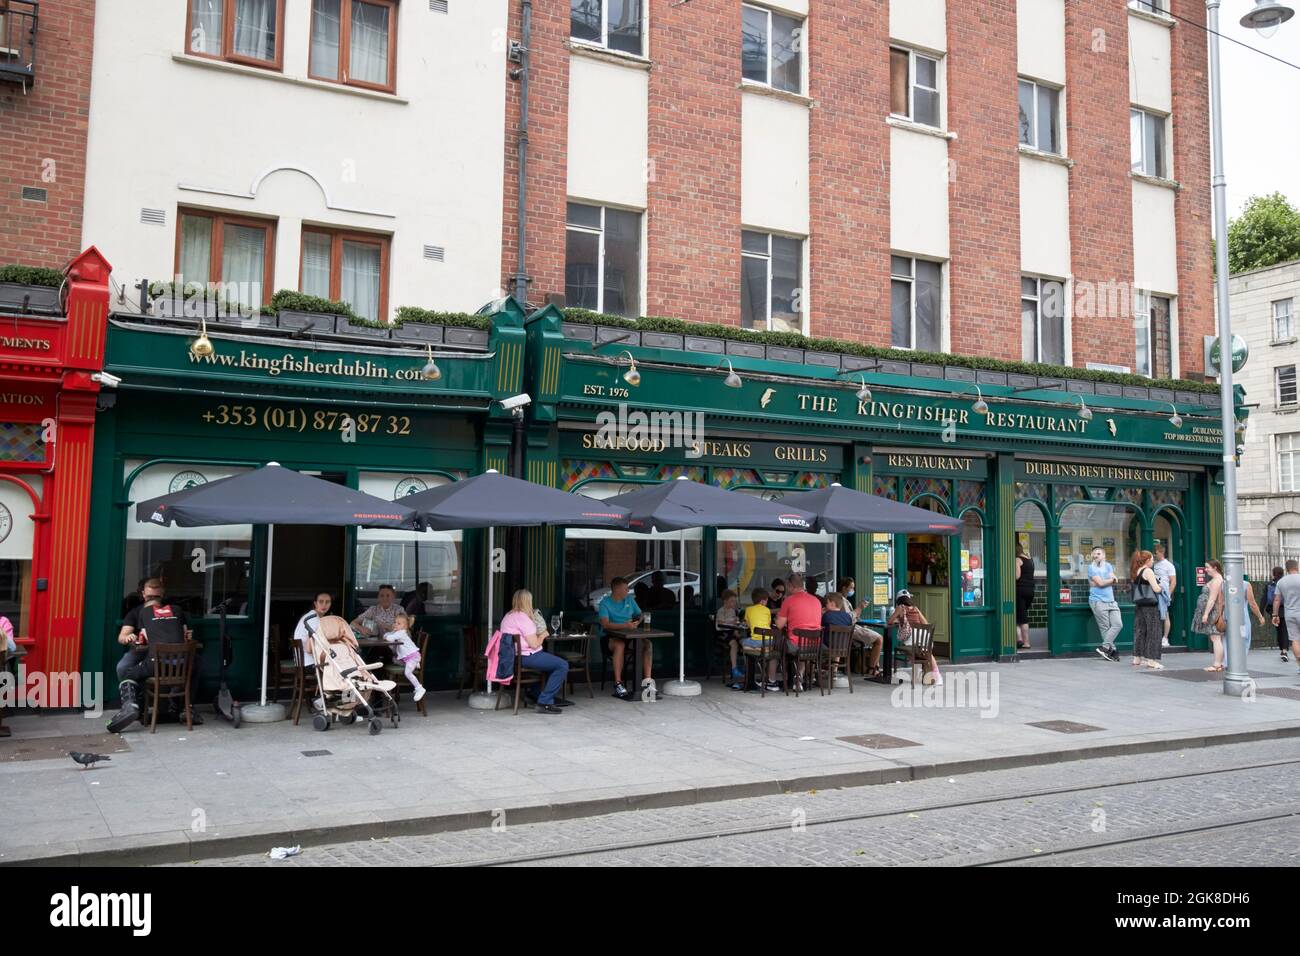 the kingfisher restaurant dublin just where patrick pearse was captured by the british during the 1916 rebellion, republic of ireland Stock Photo